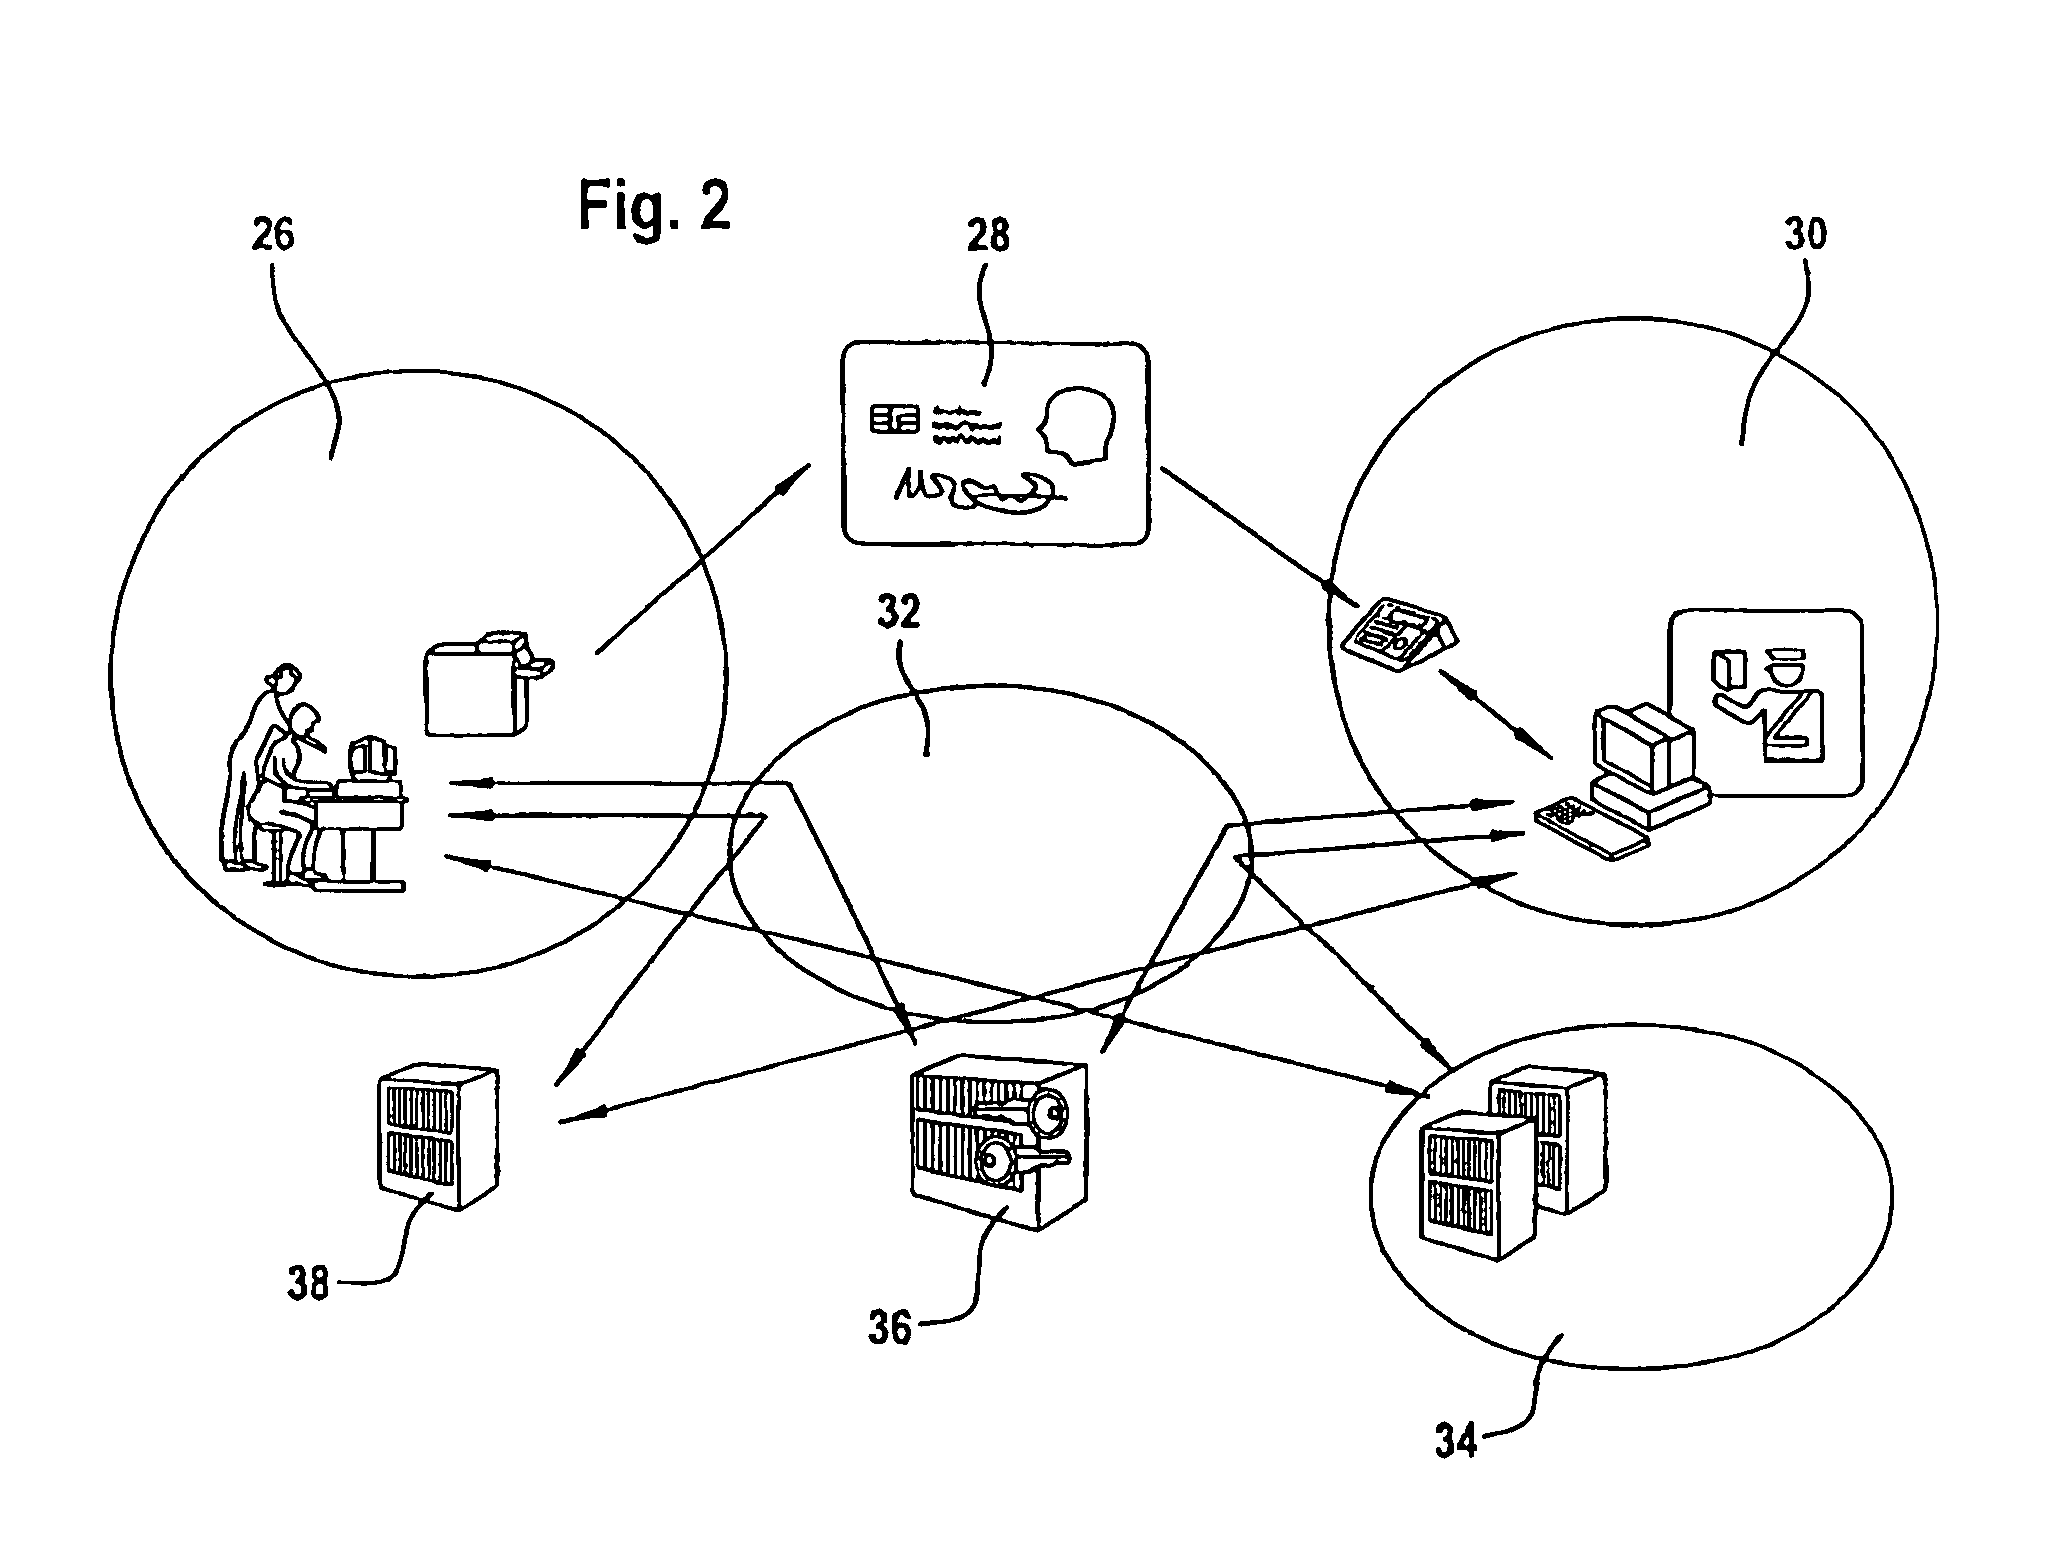 System and method for automated border-crossing checks